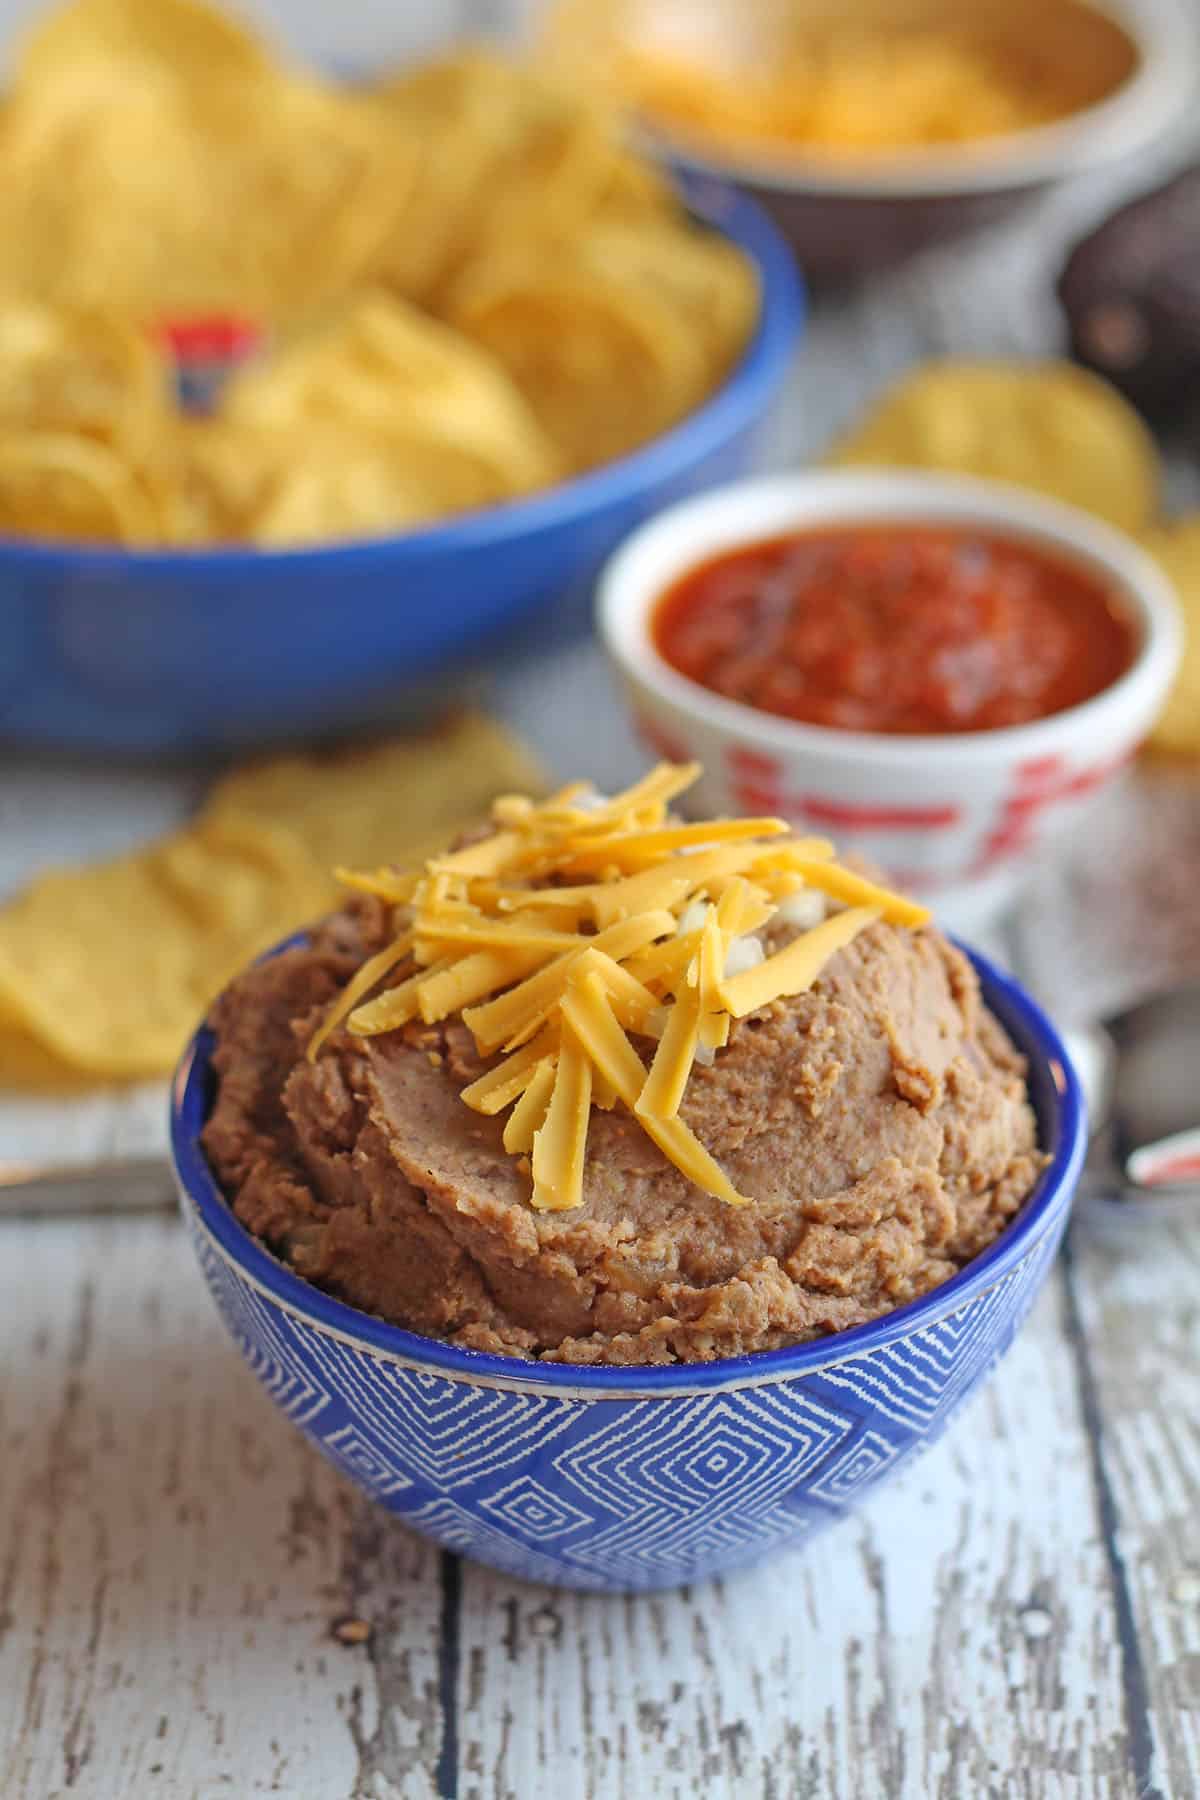 Vegan cheese shreds on bowl of refried beans by salsa and chips.